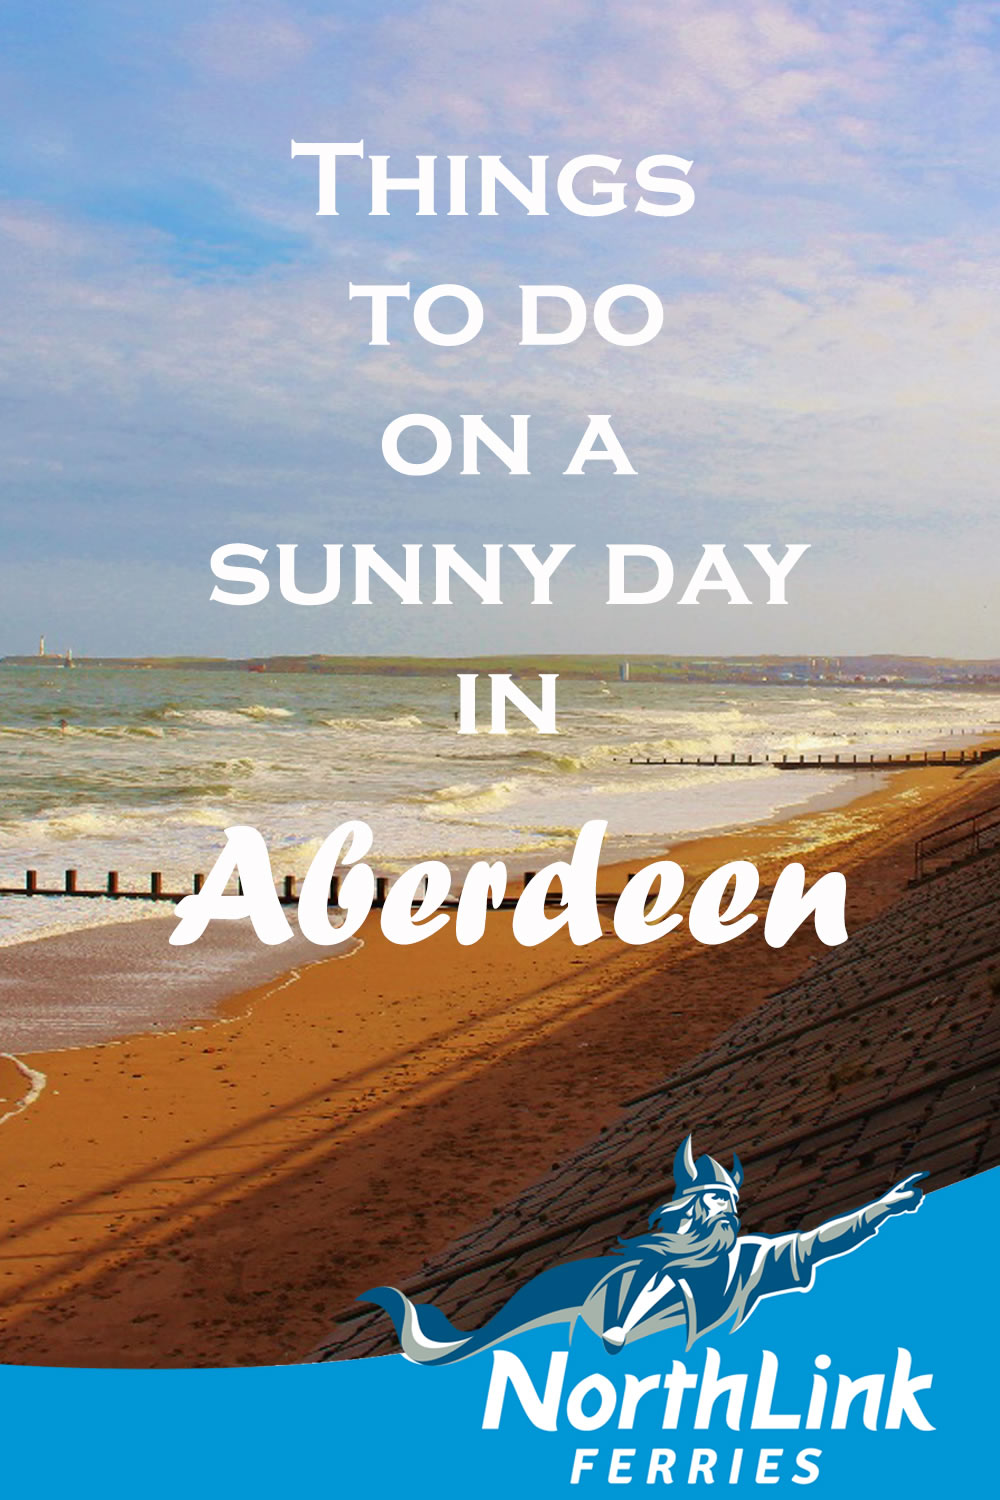 Things to do on a sunny day in Aberdeen